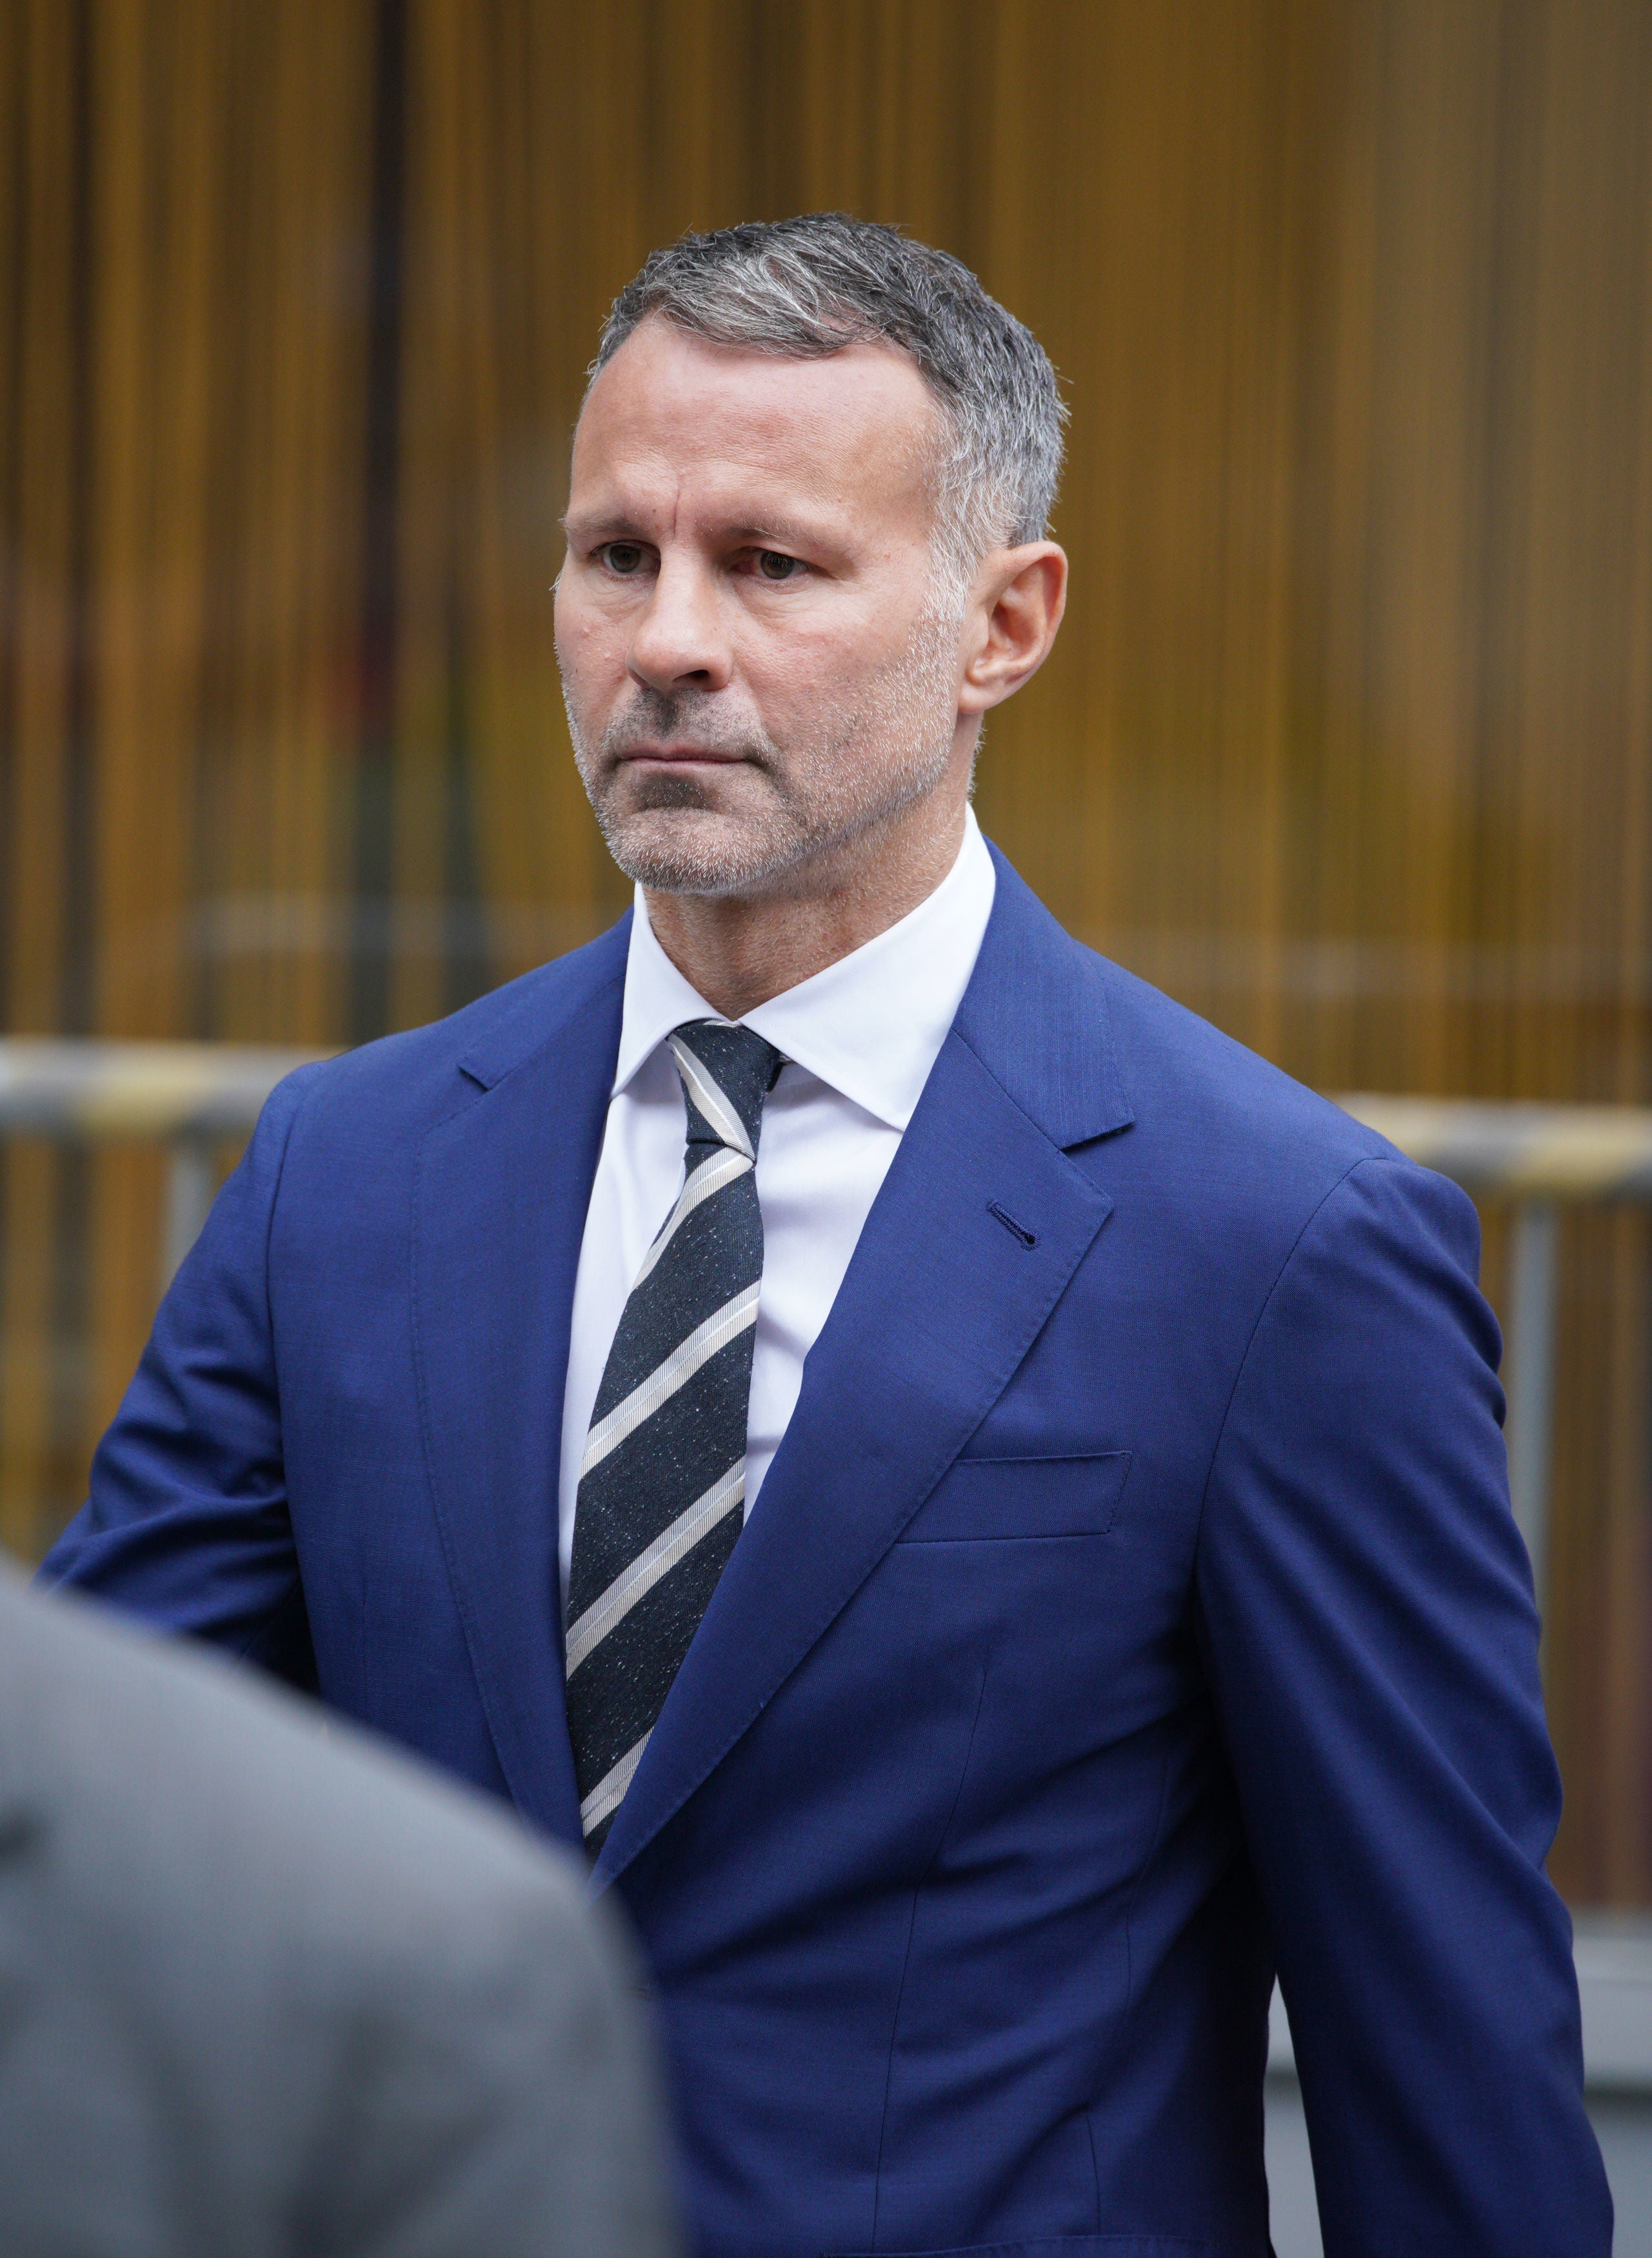 Giggs denied ‘losing control’ during a ‘tangle’ with his ex-girlfriend